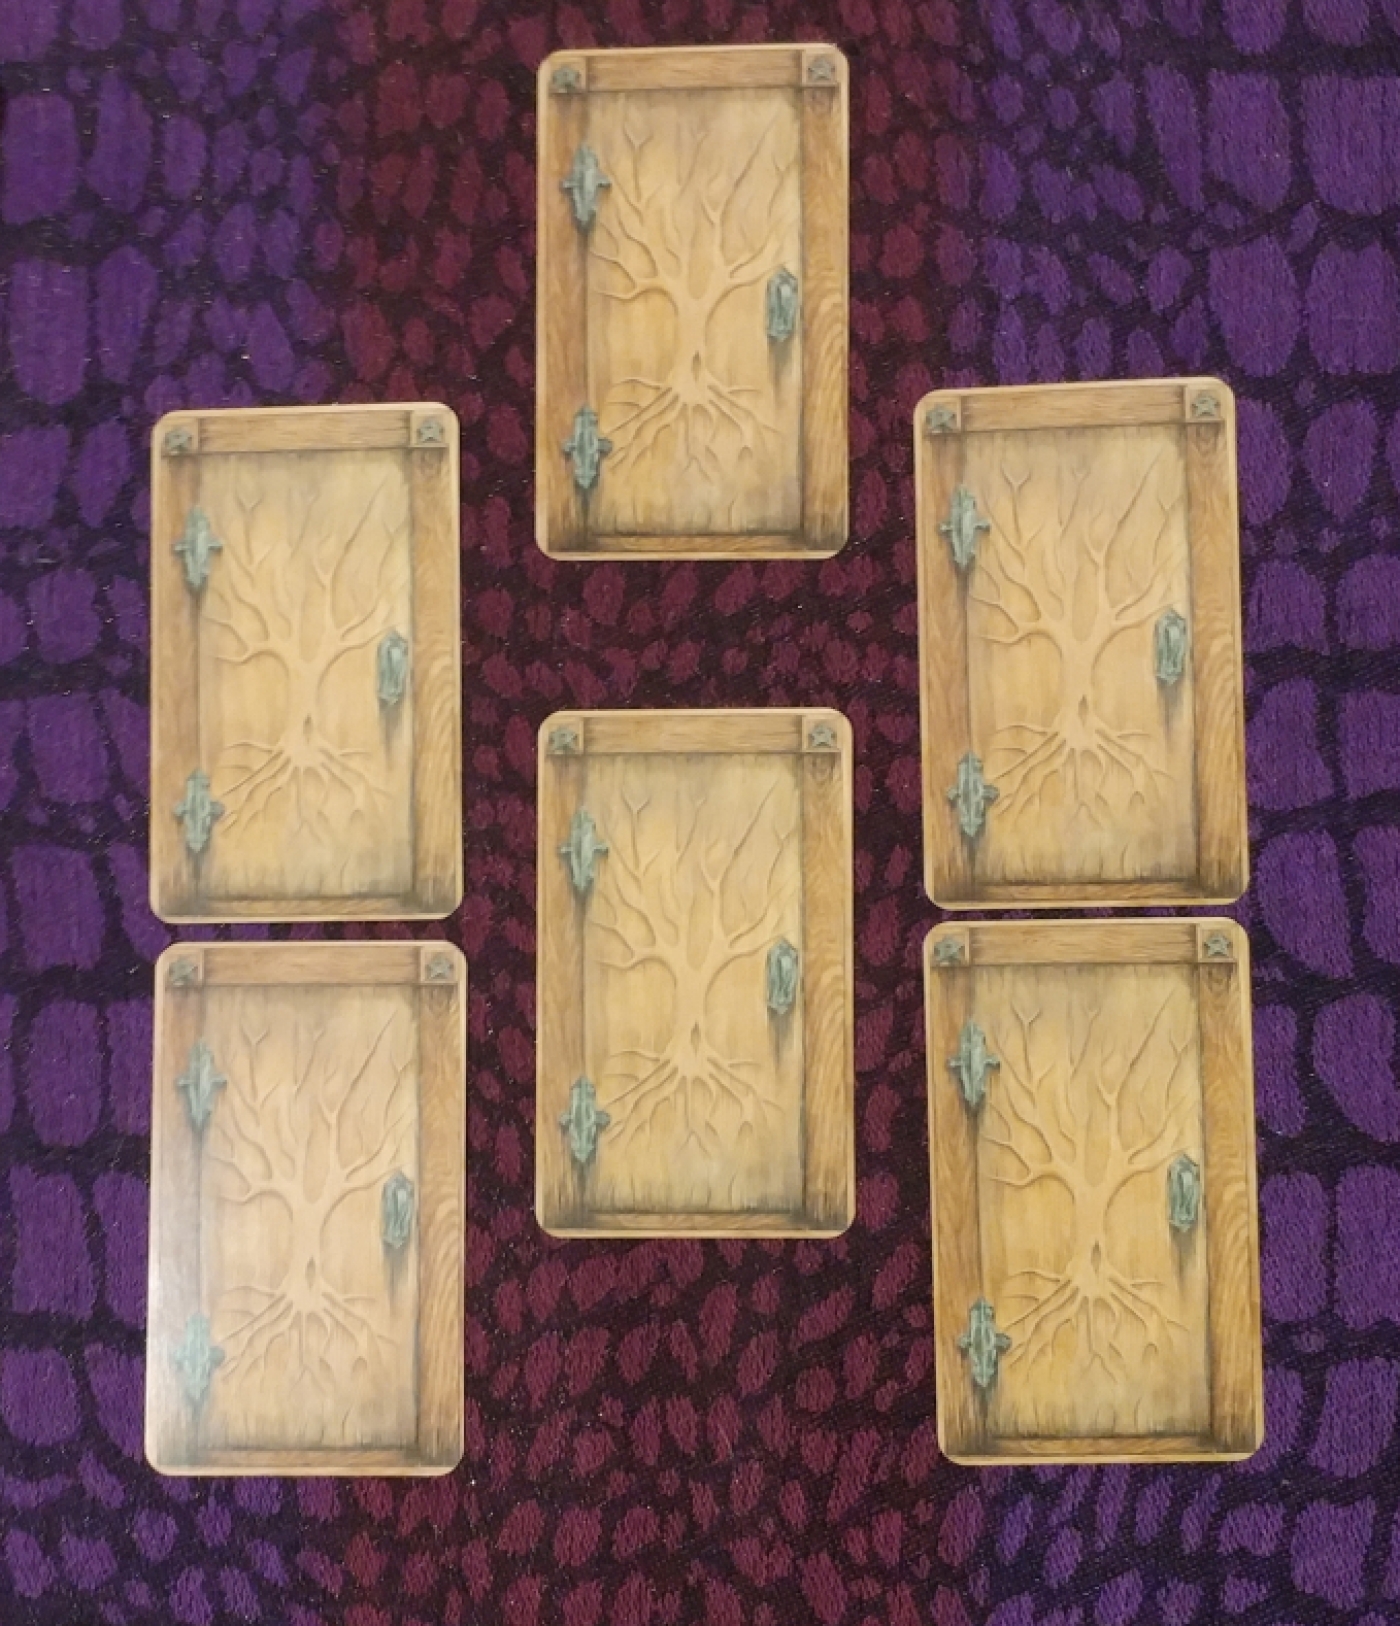 Six matching cards (faced-down) that resemble unopened wooden doors, hinting at the unknown. The frame of each door is of a darker wood, two pentagrams etched in the top corners. A naked tree is etched into the door with the roots reaching down towards the earth, the branches reaching towards the sky; this encompasses the three realms of the deep influences of the past, the present moment, and the influences from above. The cards are arranged to resemble the points of a pentagram (five-pointed star comprised of the elements earth, air, water, fire, and spirit) with an extra card in the center.